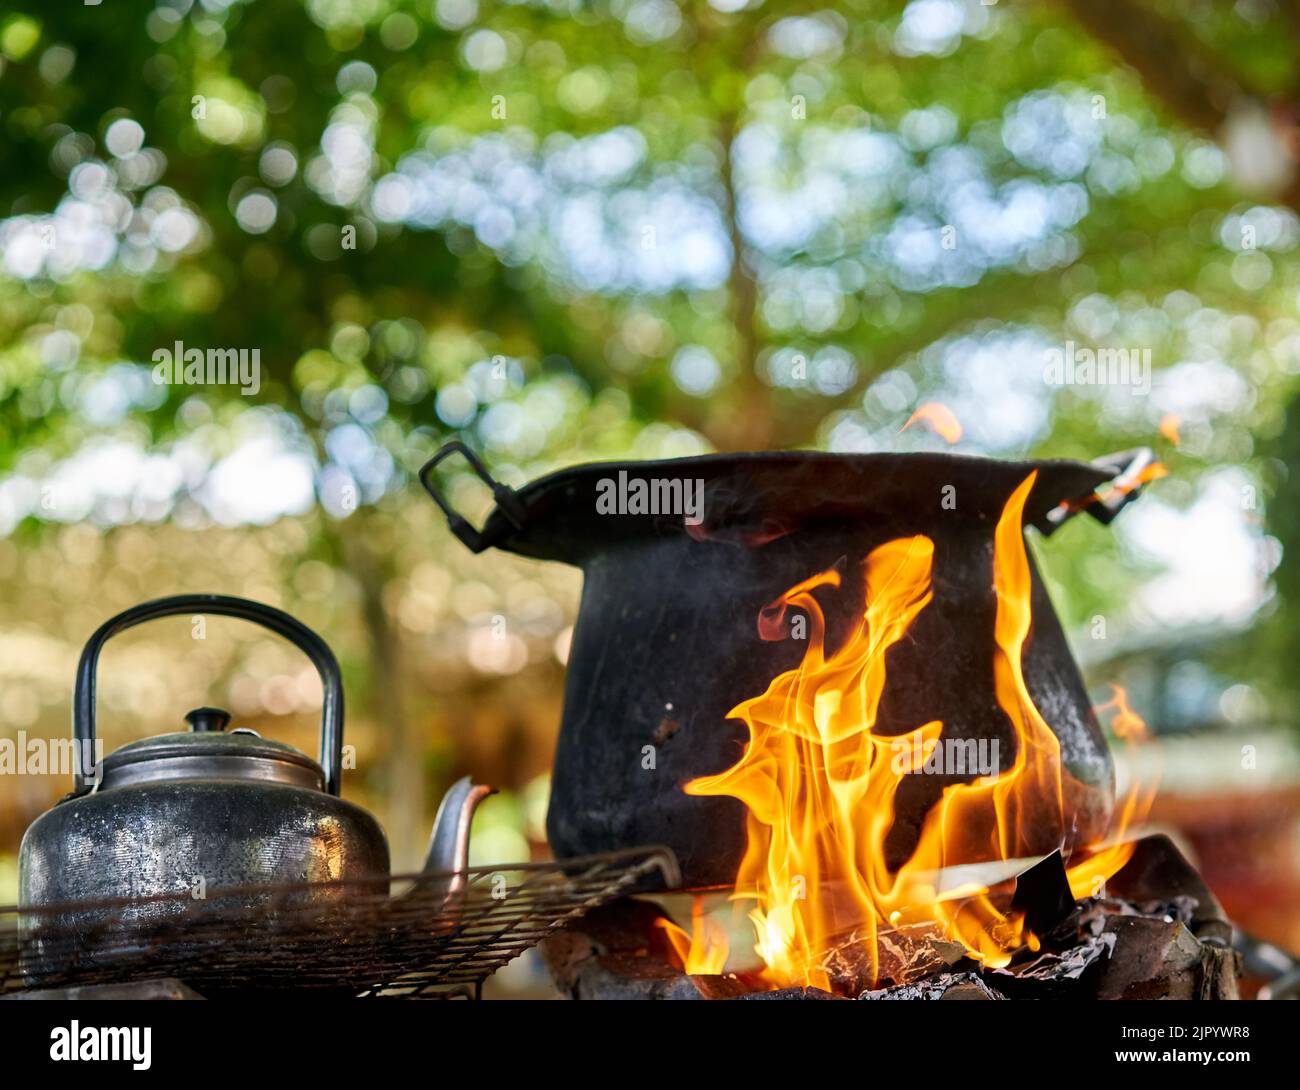 https://c8.alamy.com/comp/2JPYWR8/a-big-black-pot-and-old-kettle-on-an-outdoor-fire-2JPYWR8.jpg